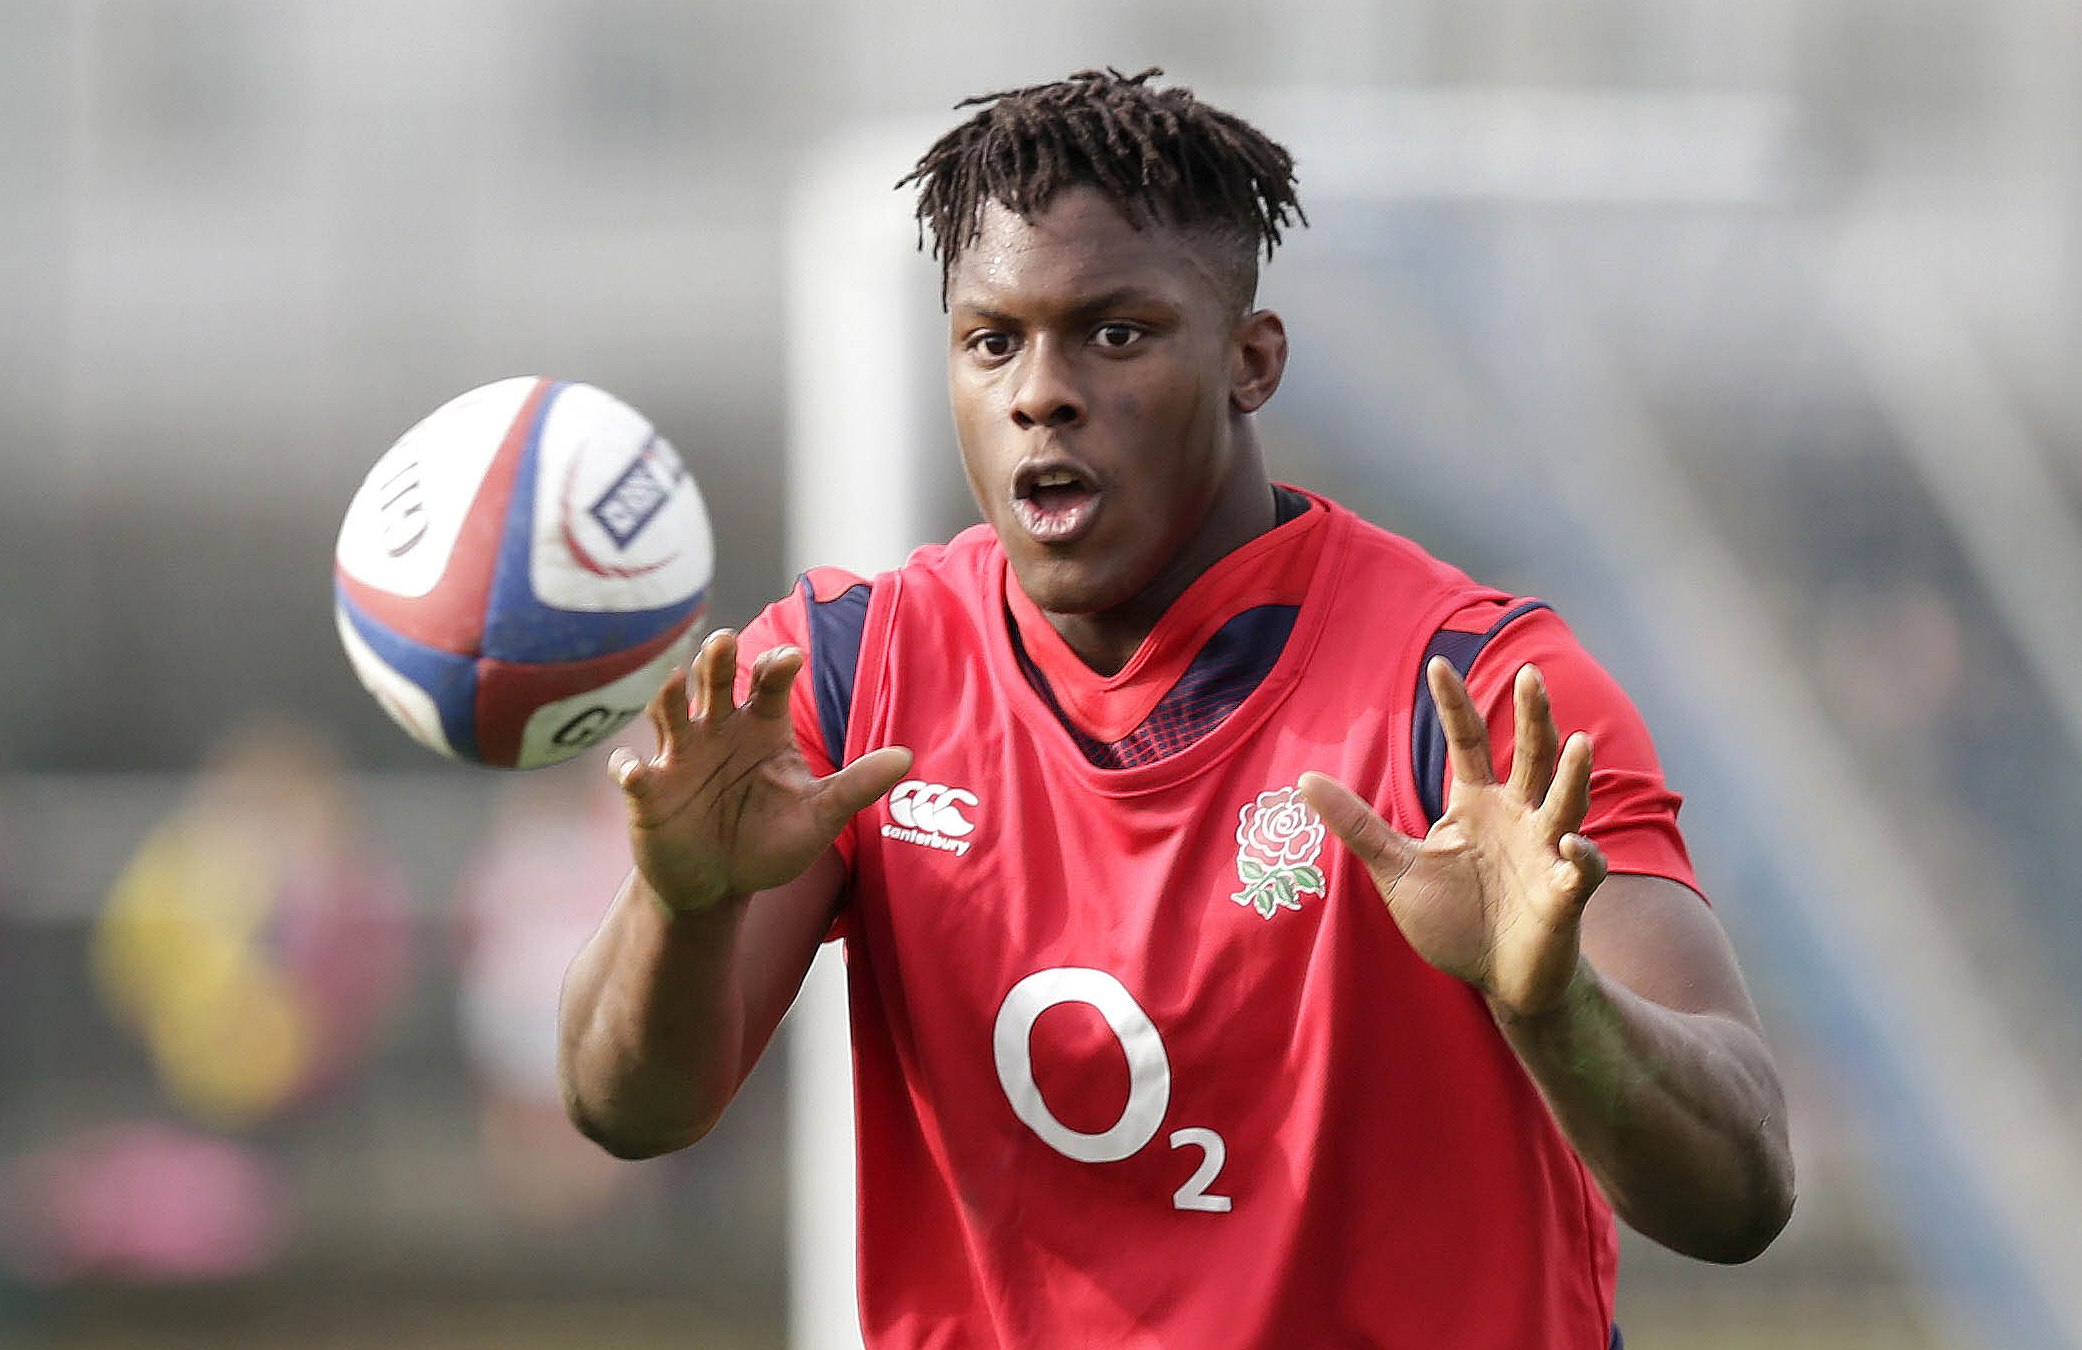 Lock Maro Itoje is in the starting line-up for England’s Six Nations match against Ireland. Itoje captained England to victory at the 2014 IRB Junior World Championship. Photos: Reuters